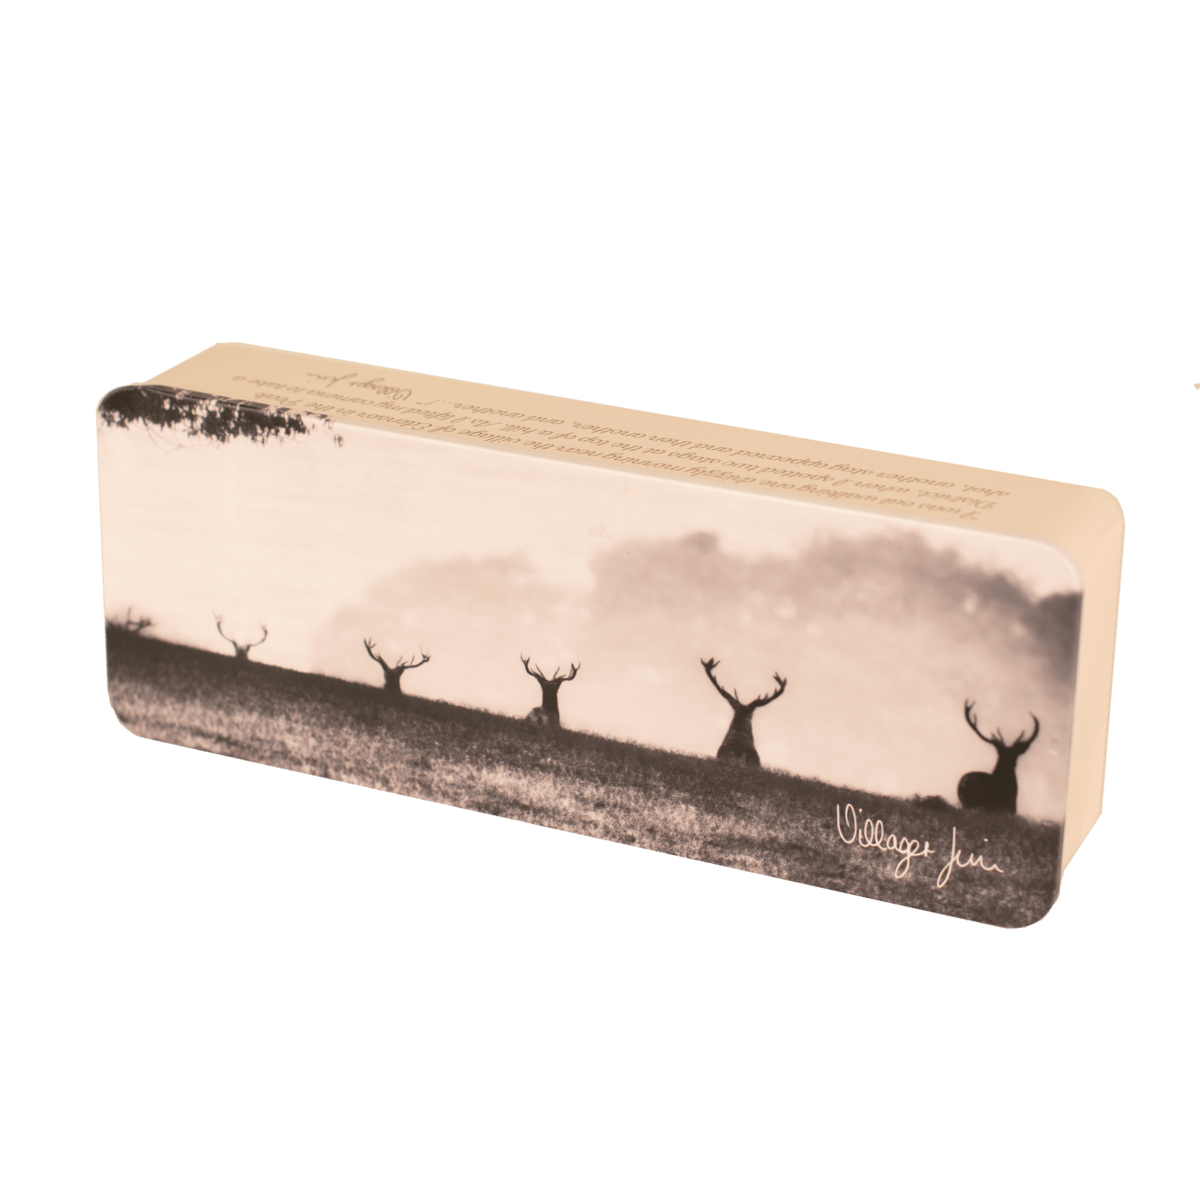 Buy the Villager Jim "Ascent of the Stag" All Butter Shortbread Squares 180g online at Dean's